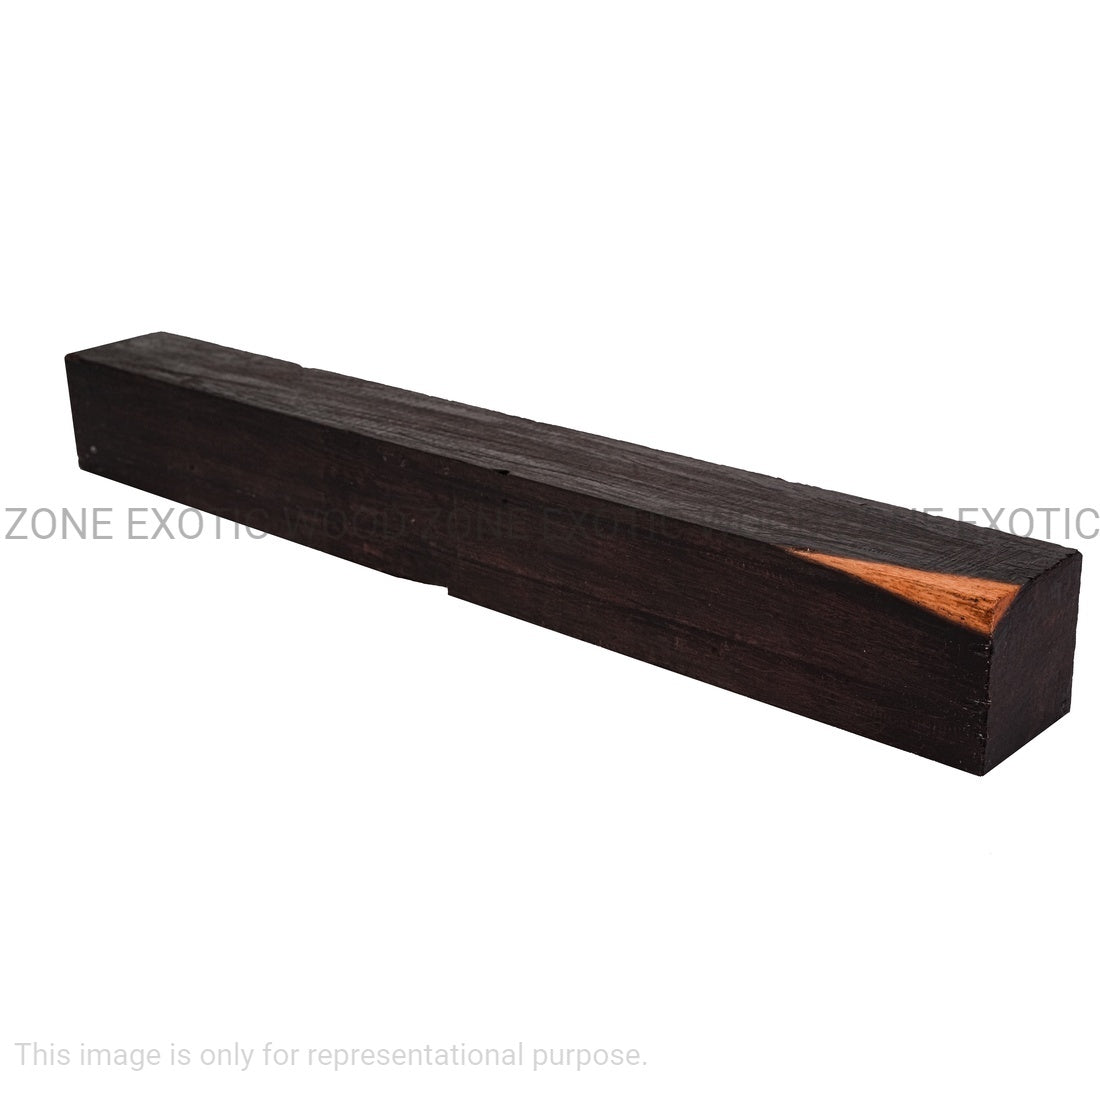 Pack of 2, Katalox Turning Wood Blanks 1-1/2&quot; x 1-1/2” x 18” - Exotic Wood Zone - Buy online Across USA 